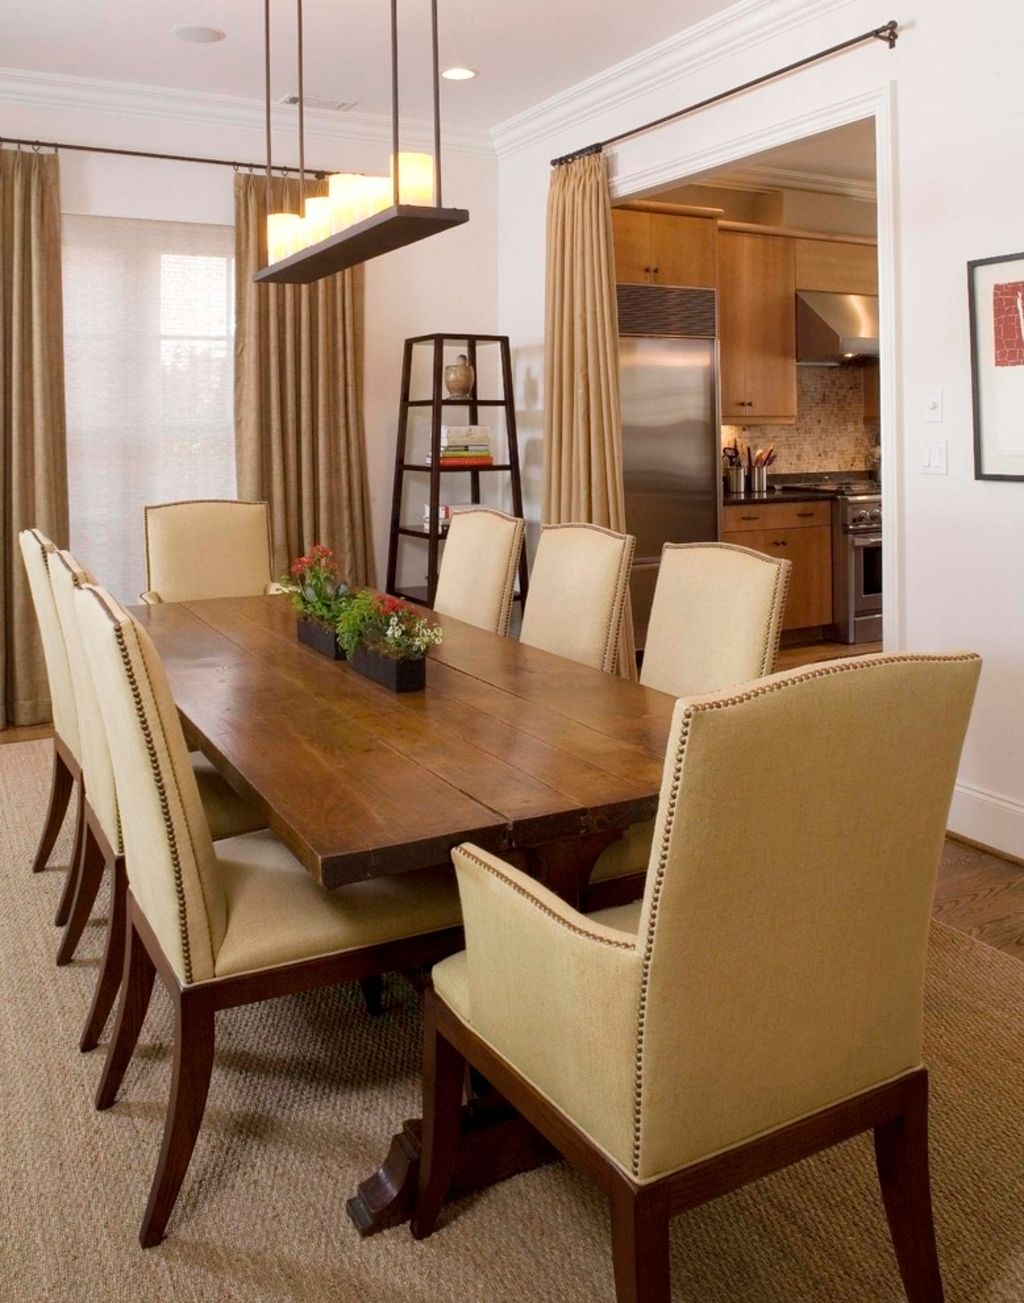 Mosaic Dining Table With Leather Chairs For Classic Look (View 1 of 6)